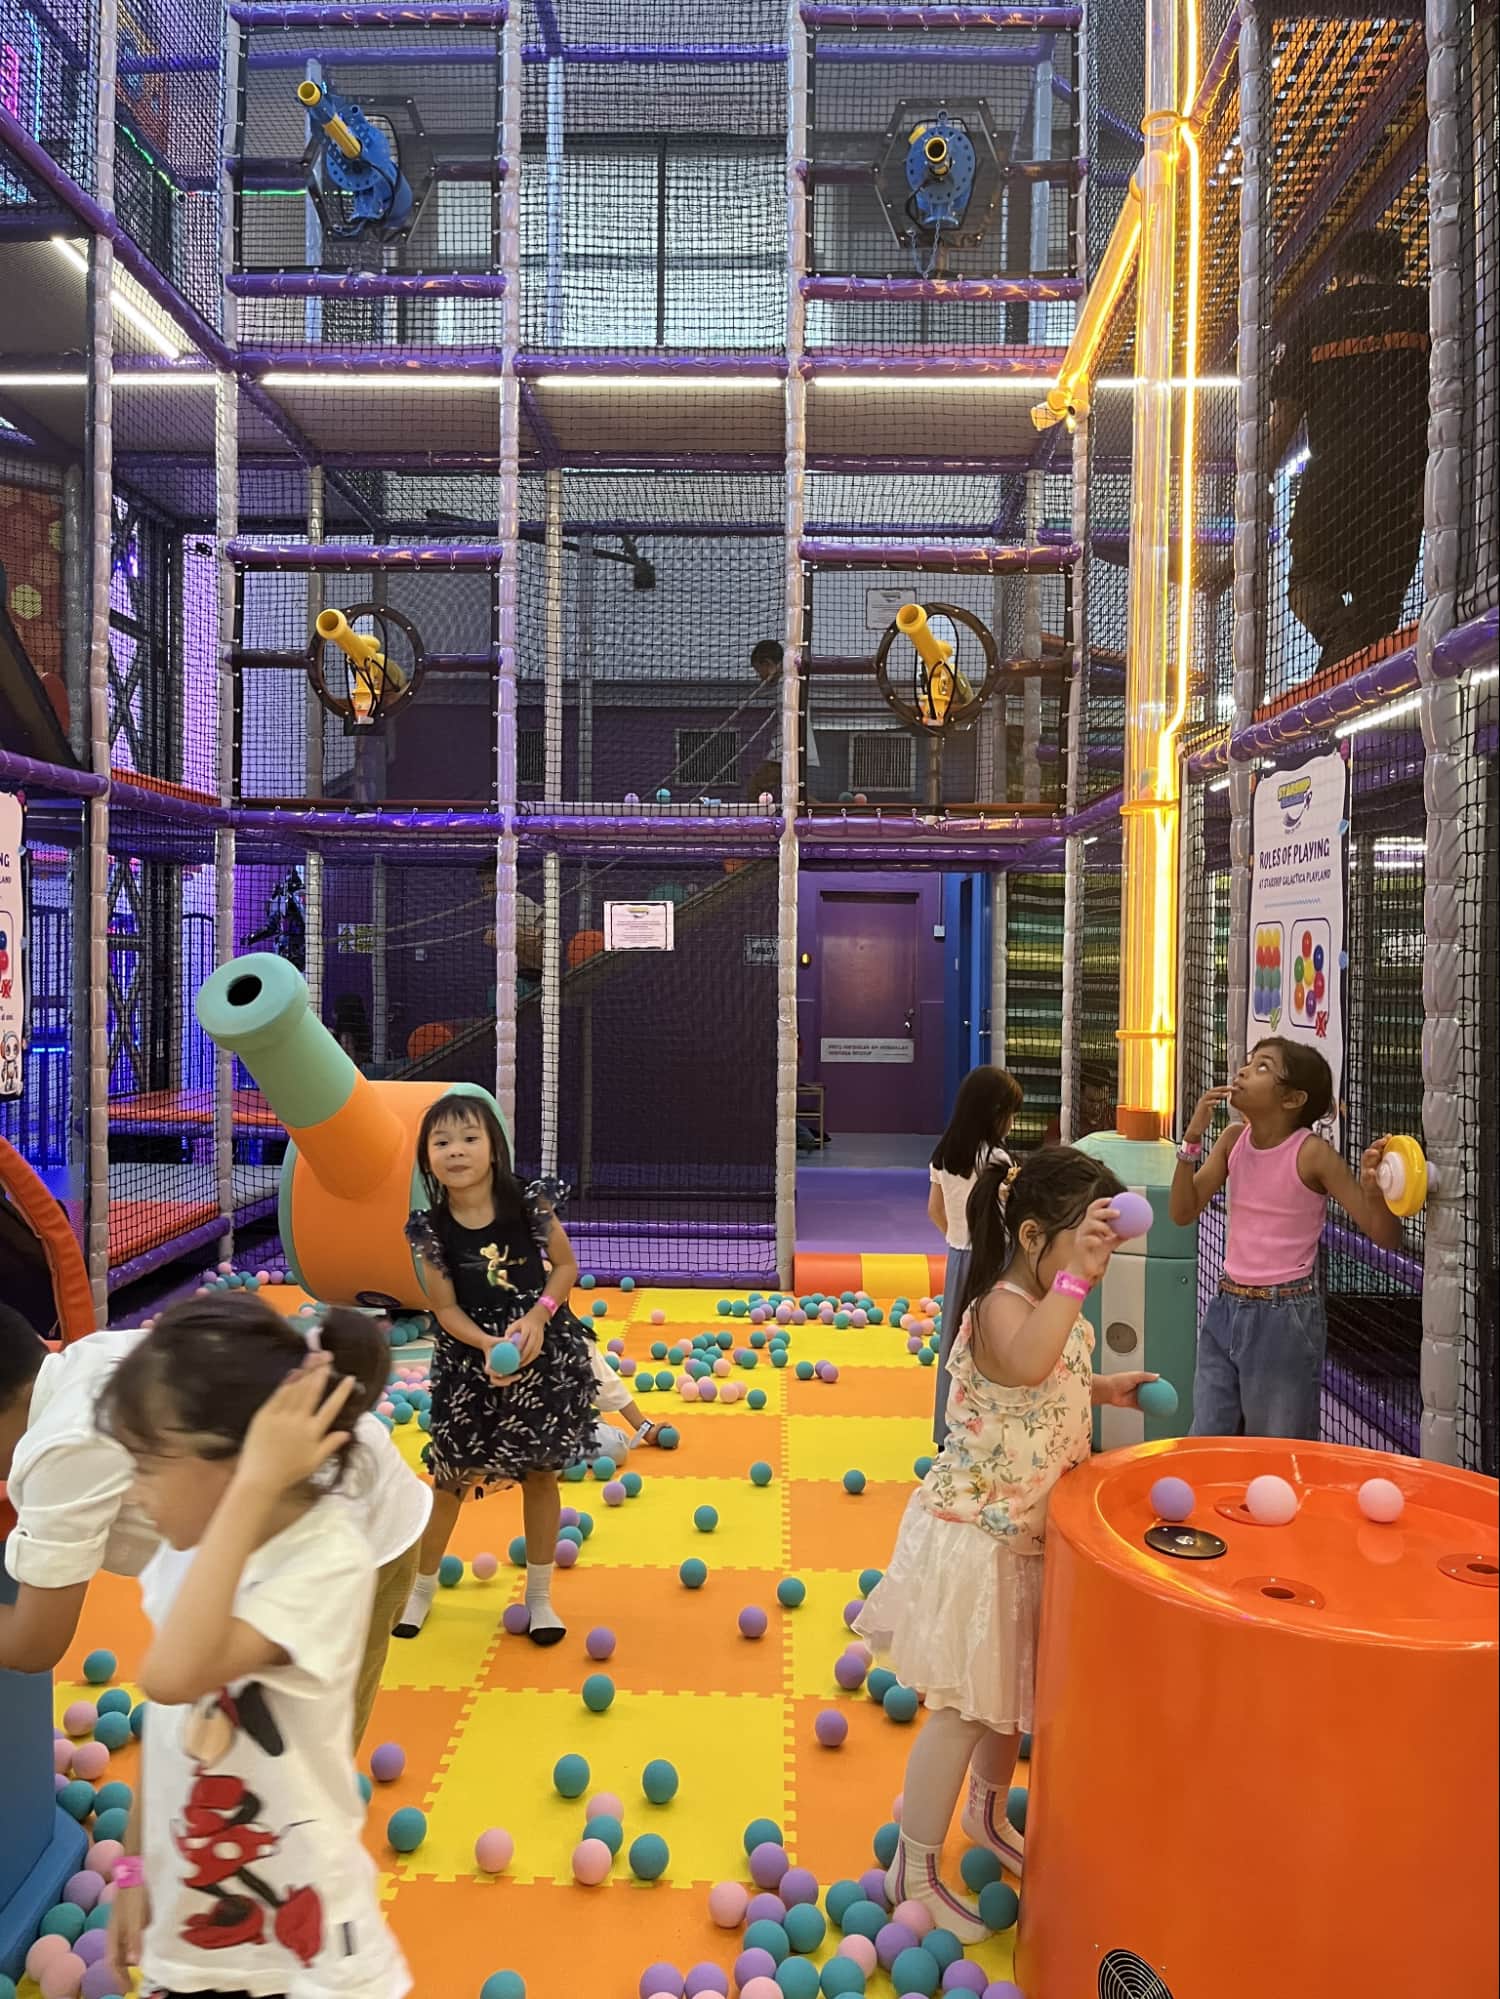 indoor playgrounds in KL - Starship Galactica